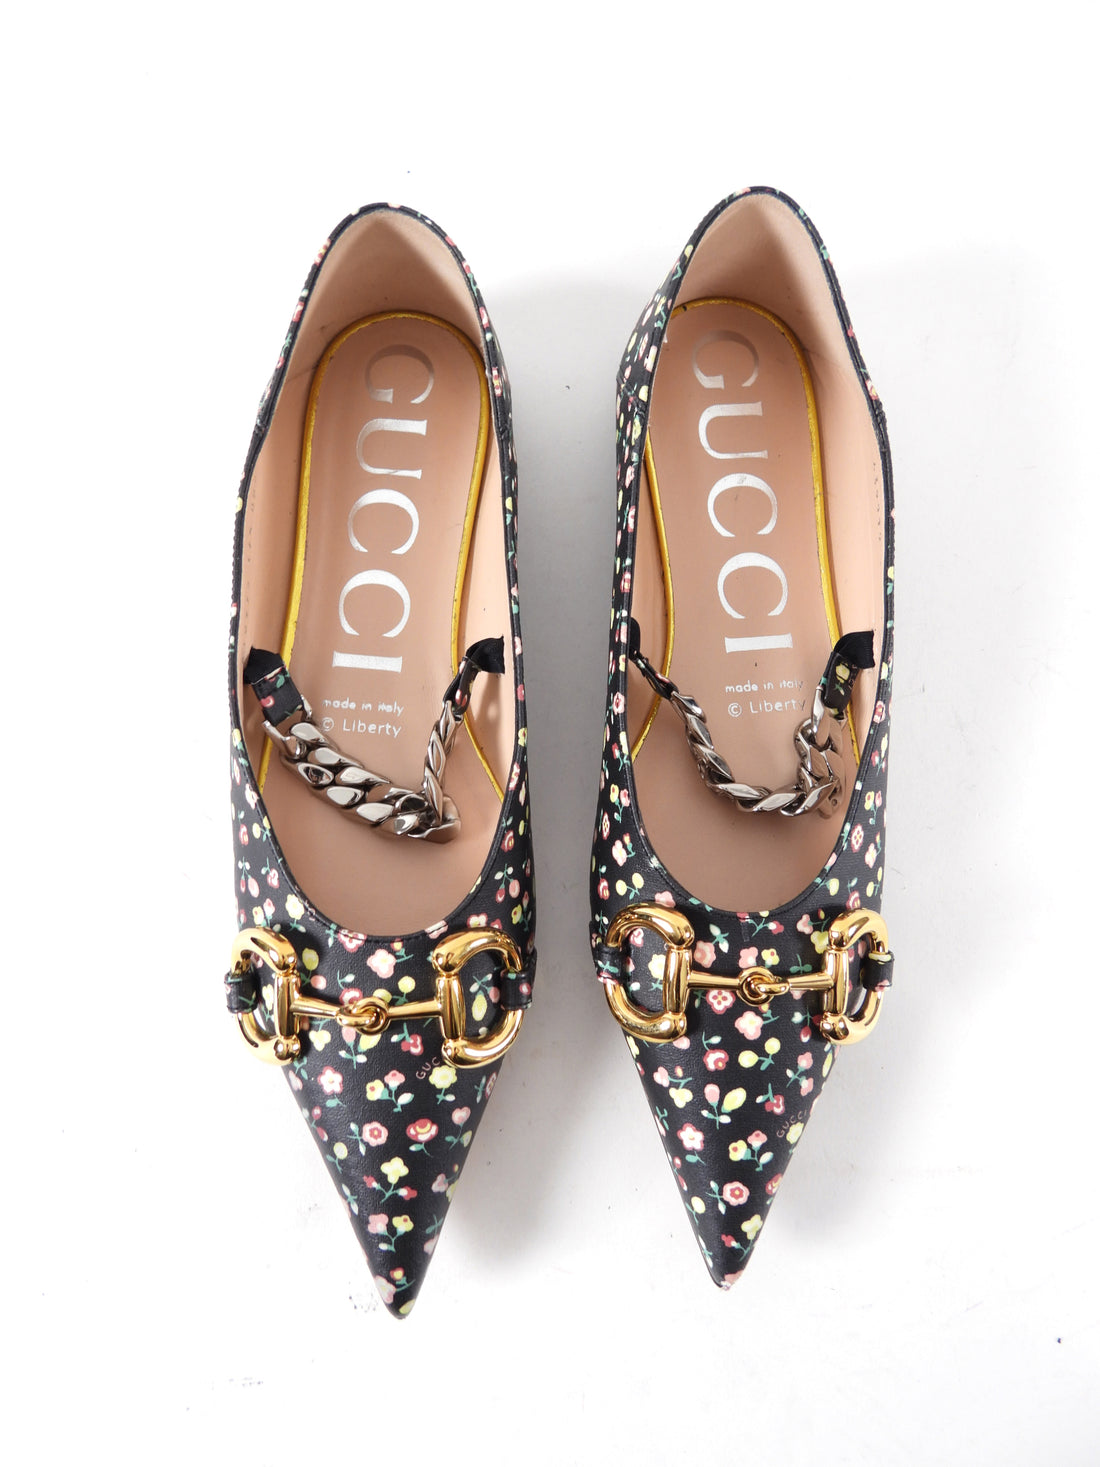 Gucci x Liberty London Limited Edition Floral Pointed Chain Flats - US – I  MISS YOU VINTAGE